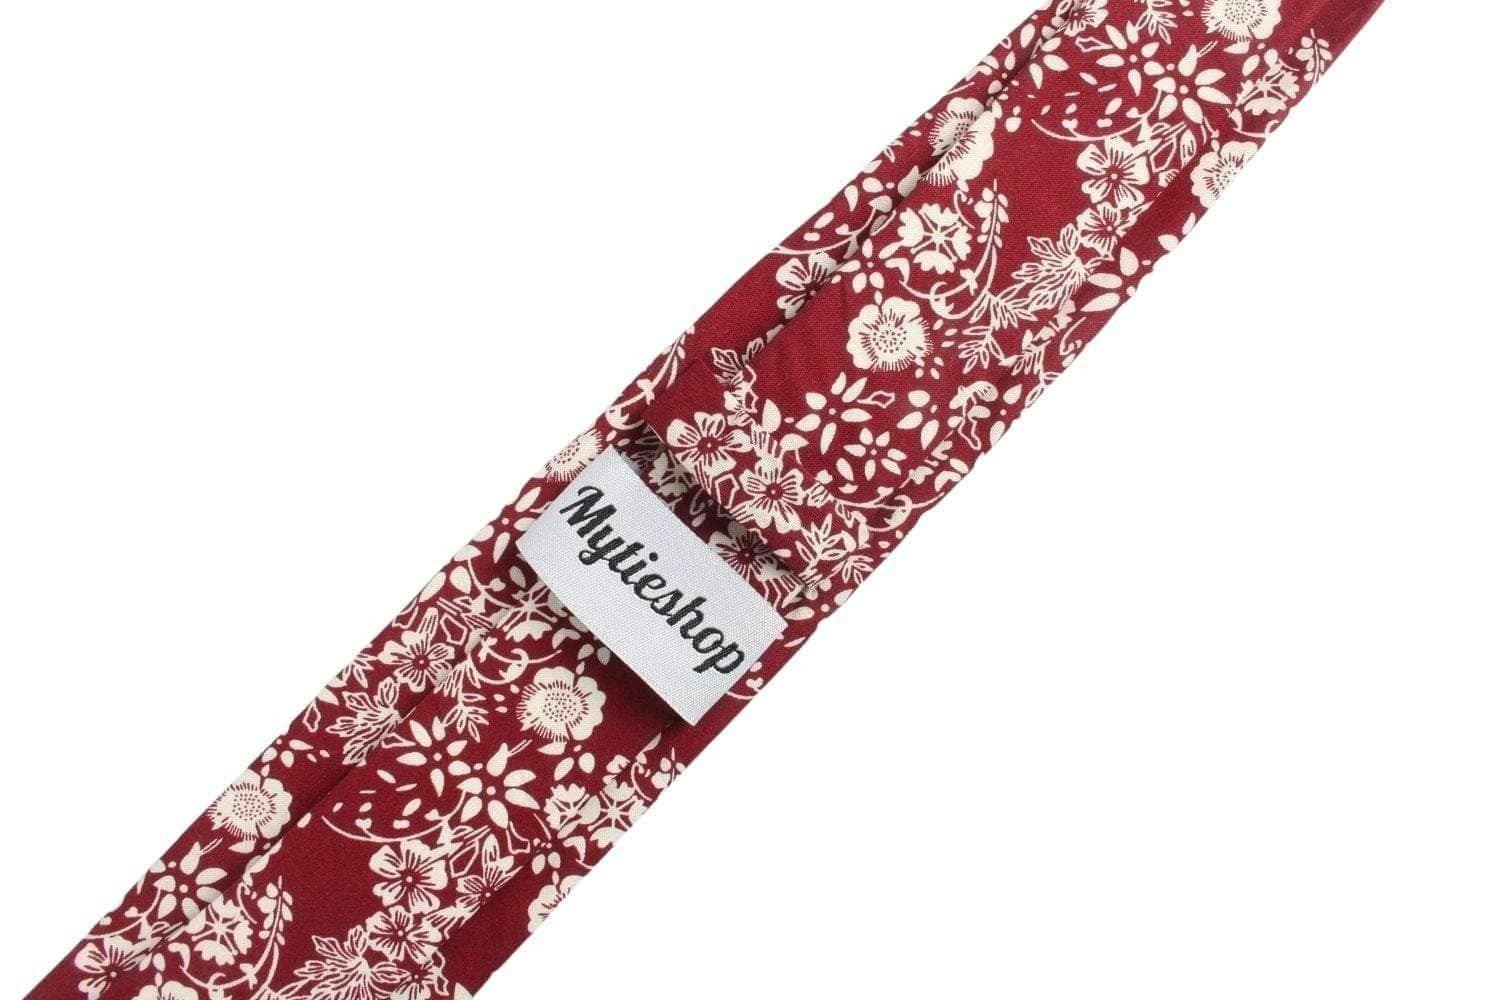 Burgundy Floral Tie 2.36" ELI - MYTIESHOP-Neckties-Burgundy Floral Tie Men’s Floral Necktie for weddings and events, great for prom and anniversary gifts. Mens floral ties near me us ties tie shops-Mytieshop. Skinny ties for weddings anniversaries. Father of bride. Groomsmen. Cool skinny neckties for men. Neckwear for prom, missions and fancy events. Gift ideas for men. Anniversaries ideas. Wedding aesthetics. Flower ties. Dry flower ties.